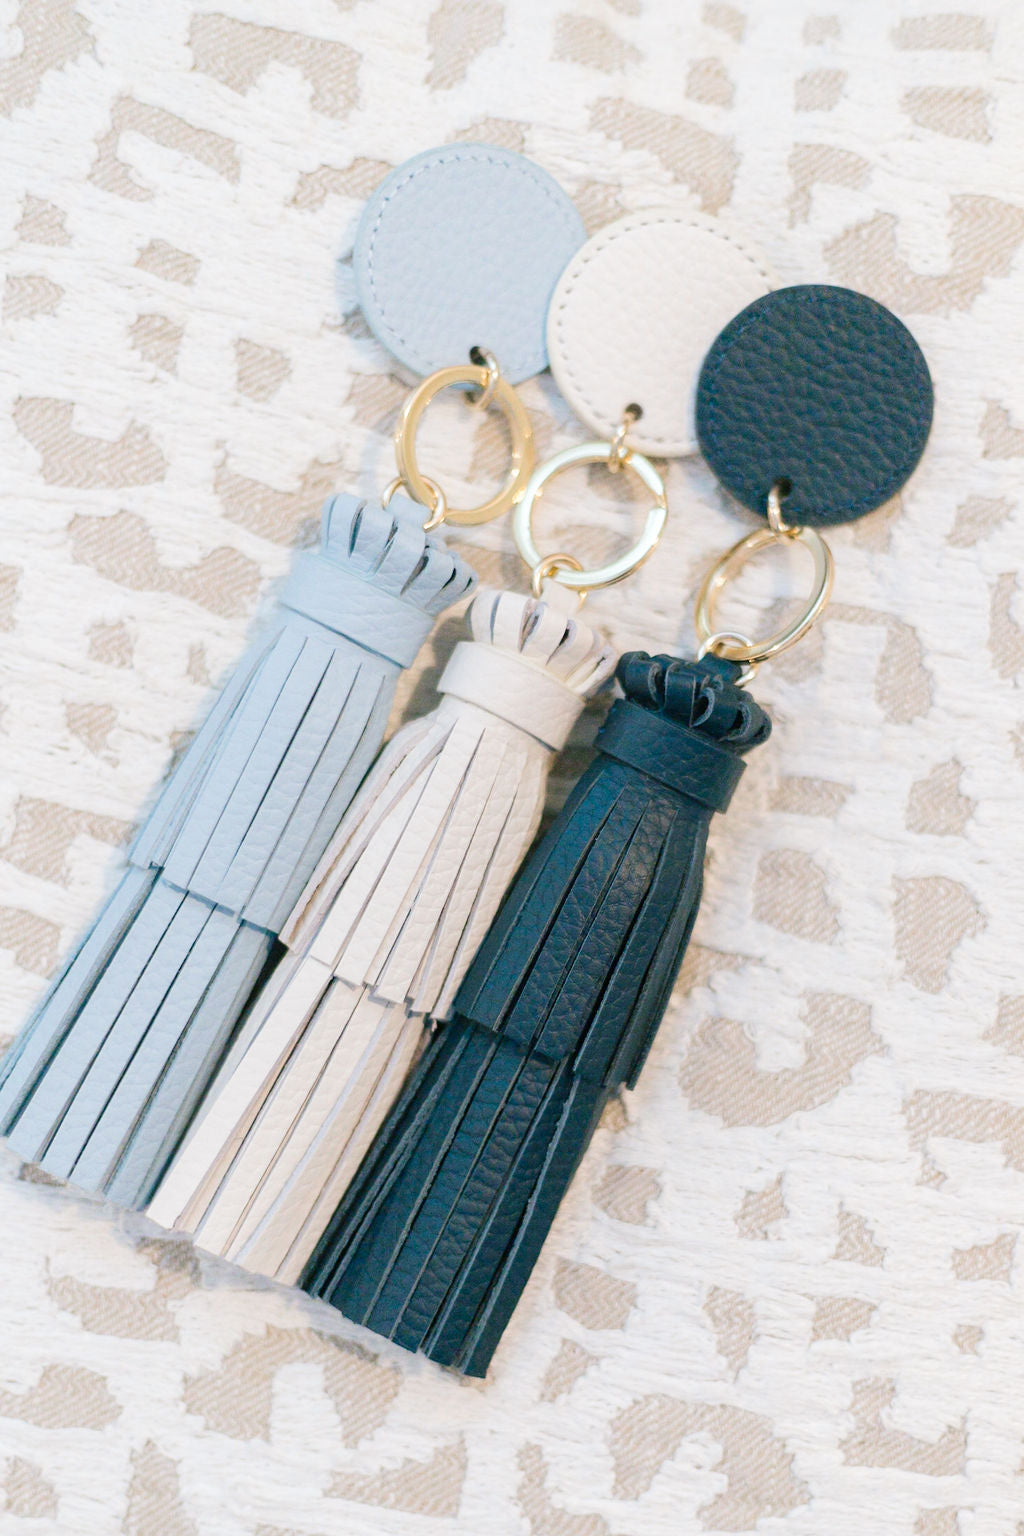 O Ring Keychain - Tassel Collection